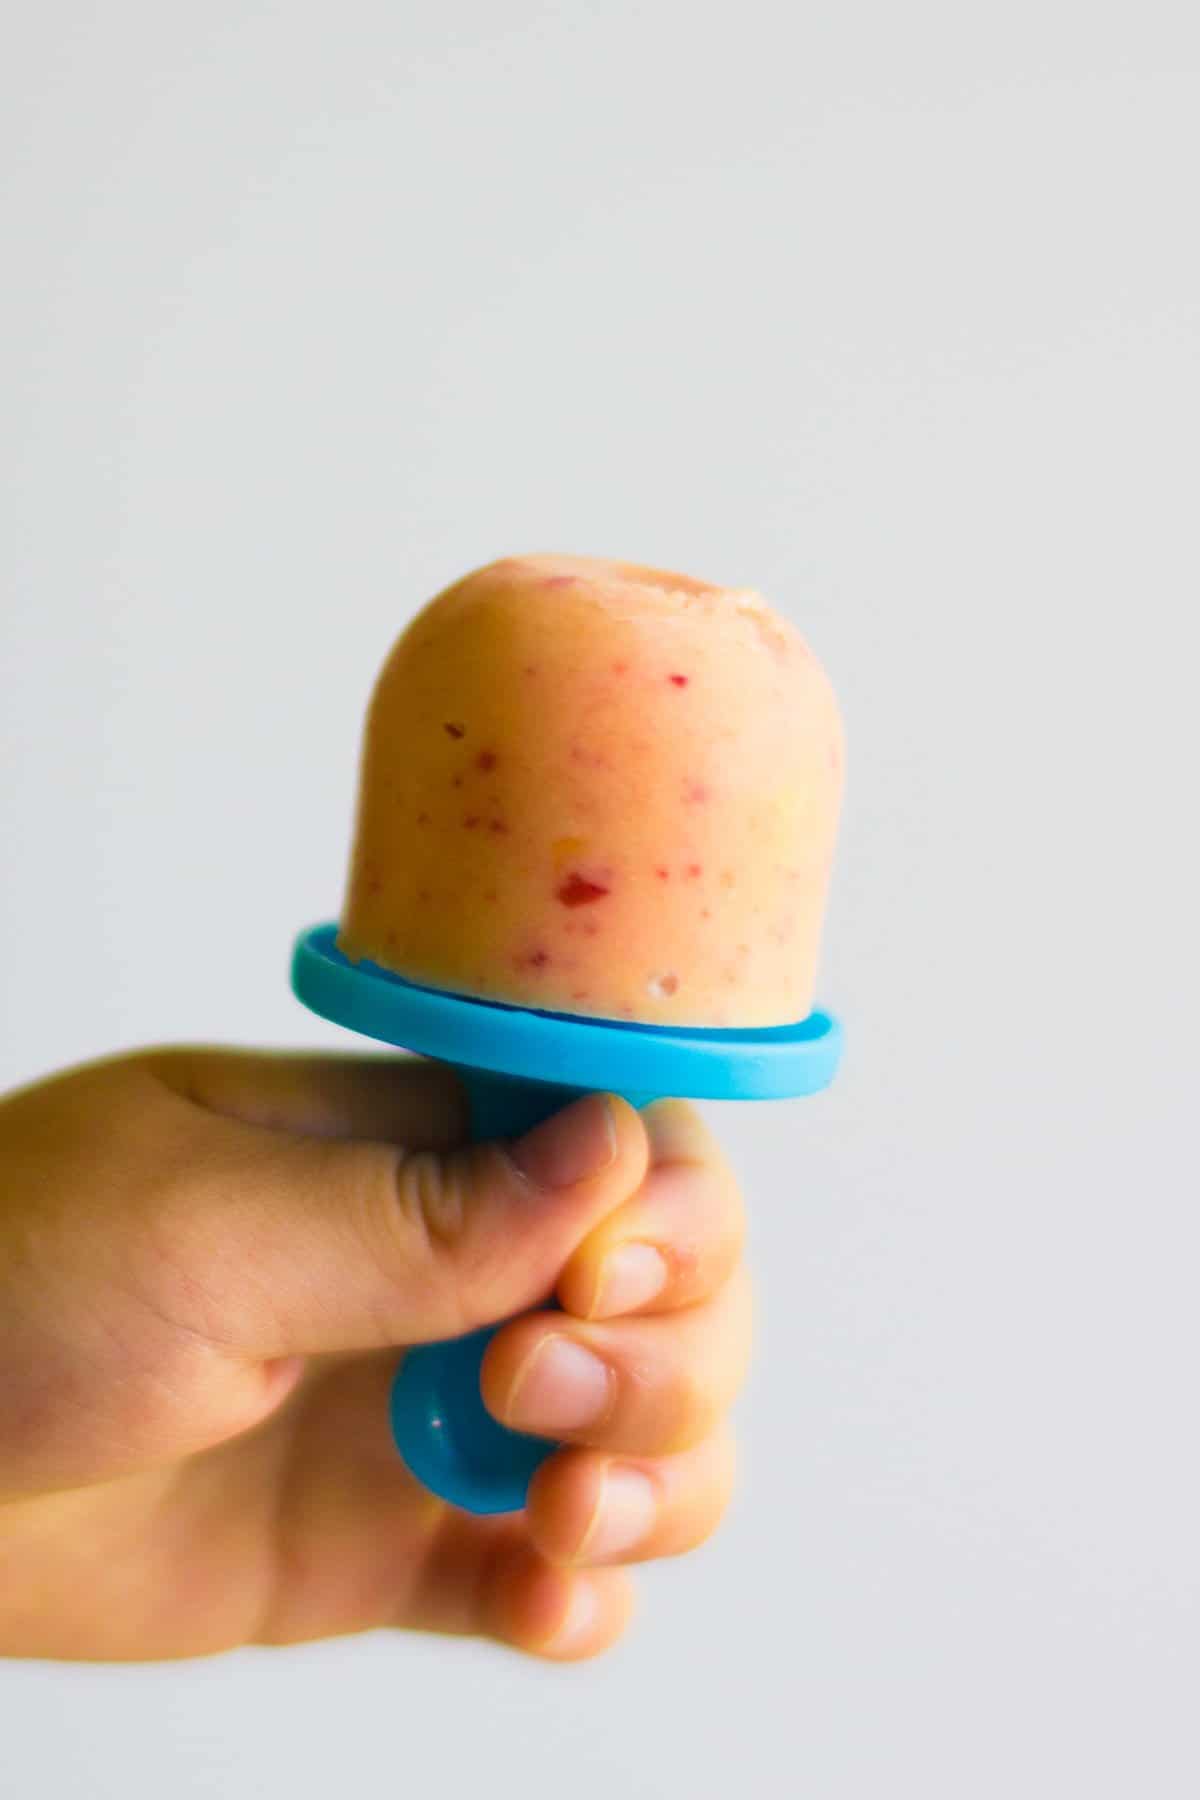 Toddler's hand holding a small peach yogurt popsicle.